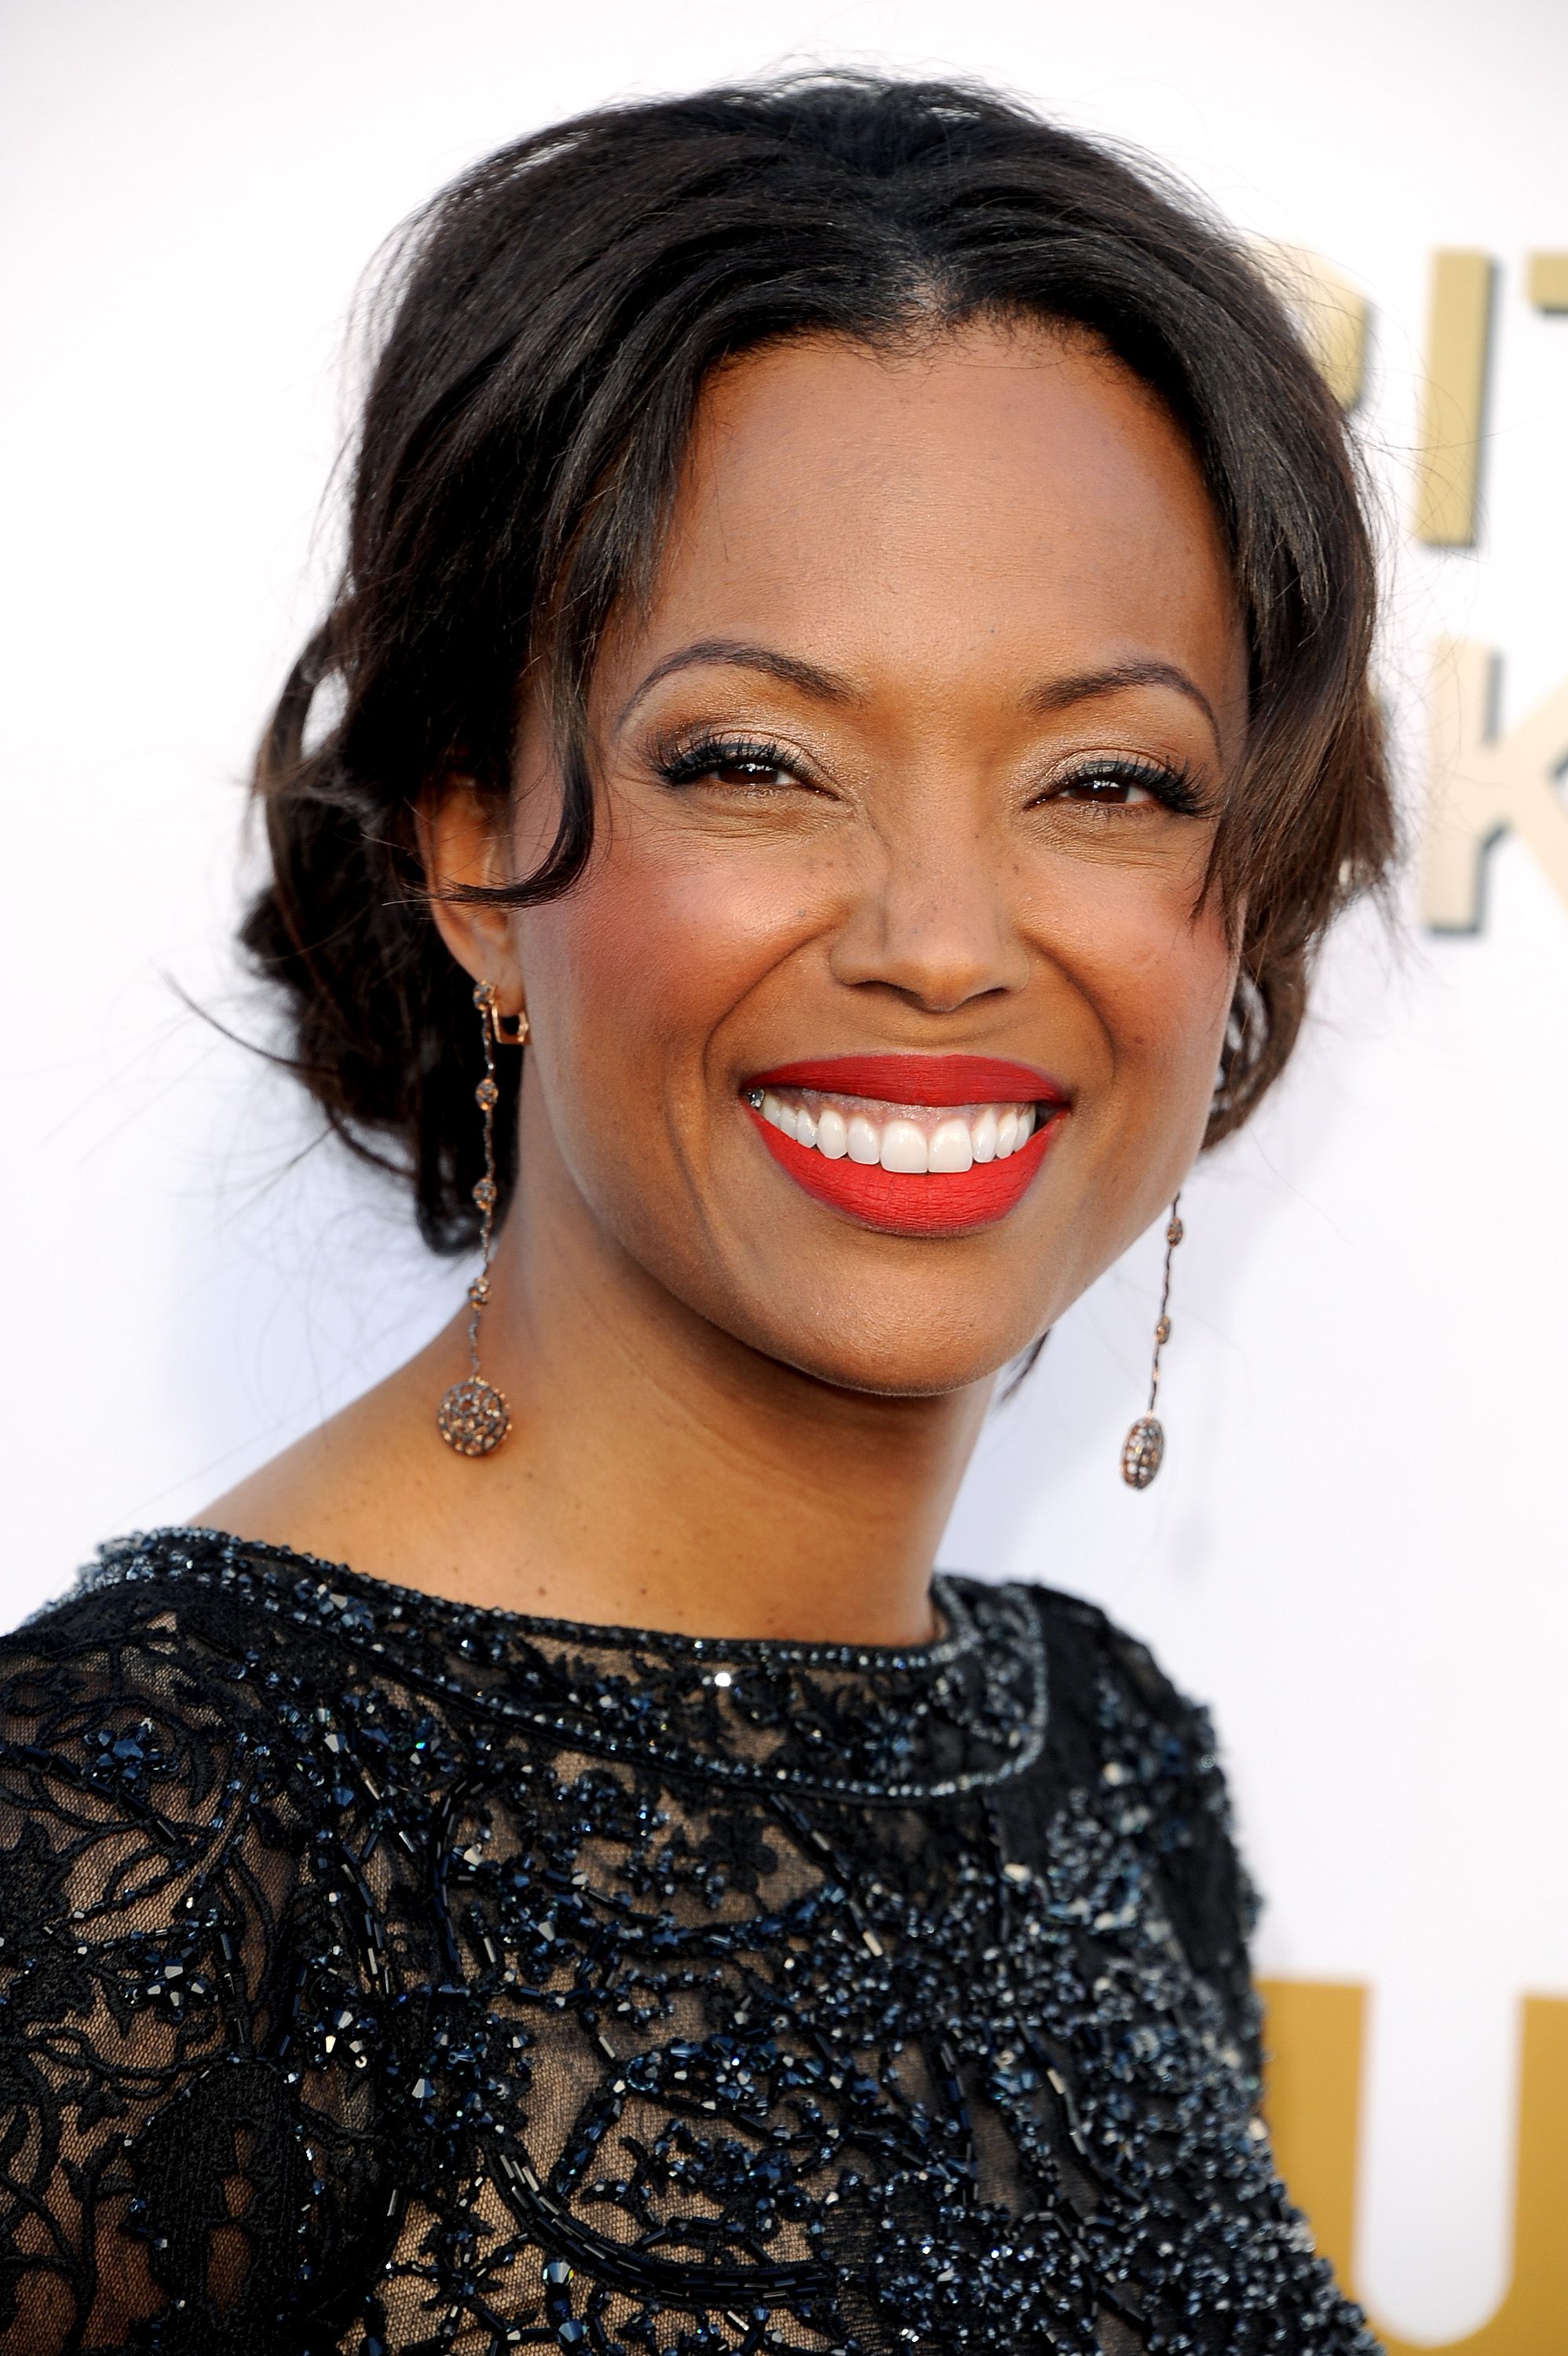 The Talk' Star Aisha Tyler and Husband Jeff Tietjens File for Divorce After 22 Years of Marriage Weekly. Aisha tyler, Woman smile, Divorce